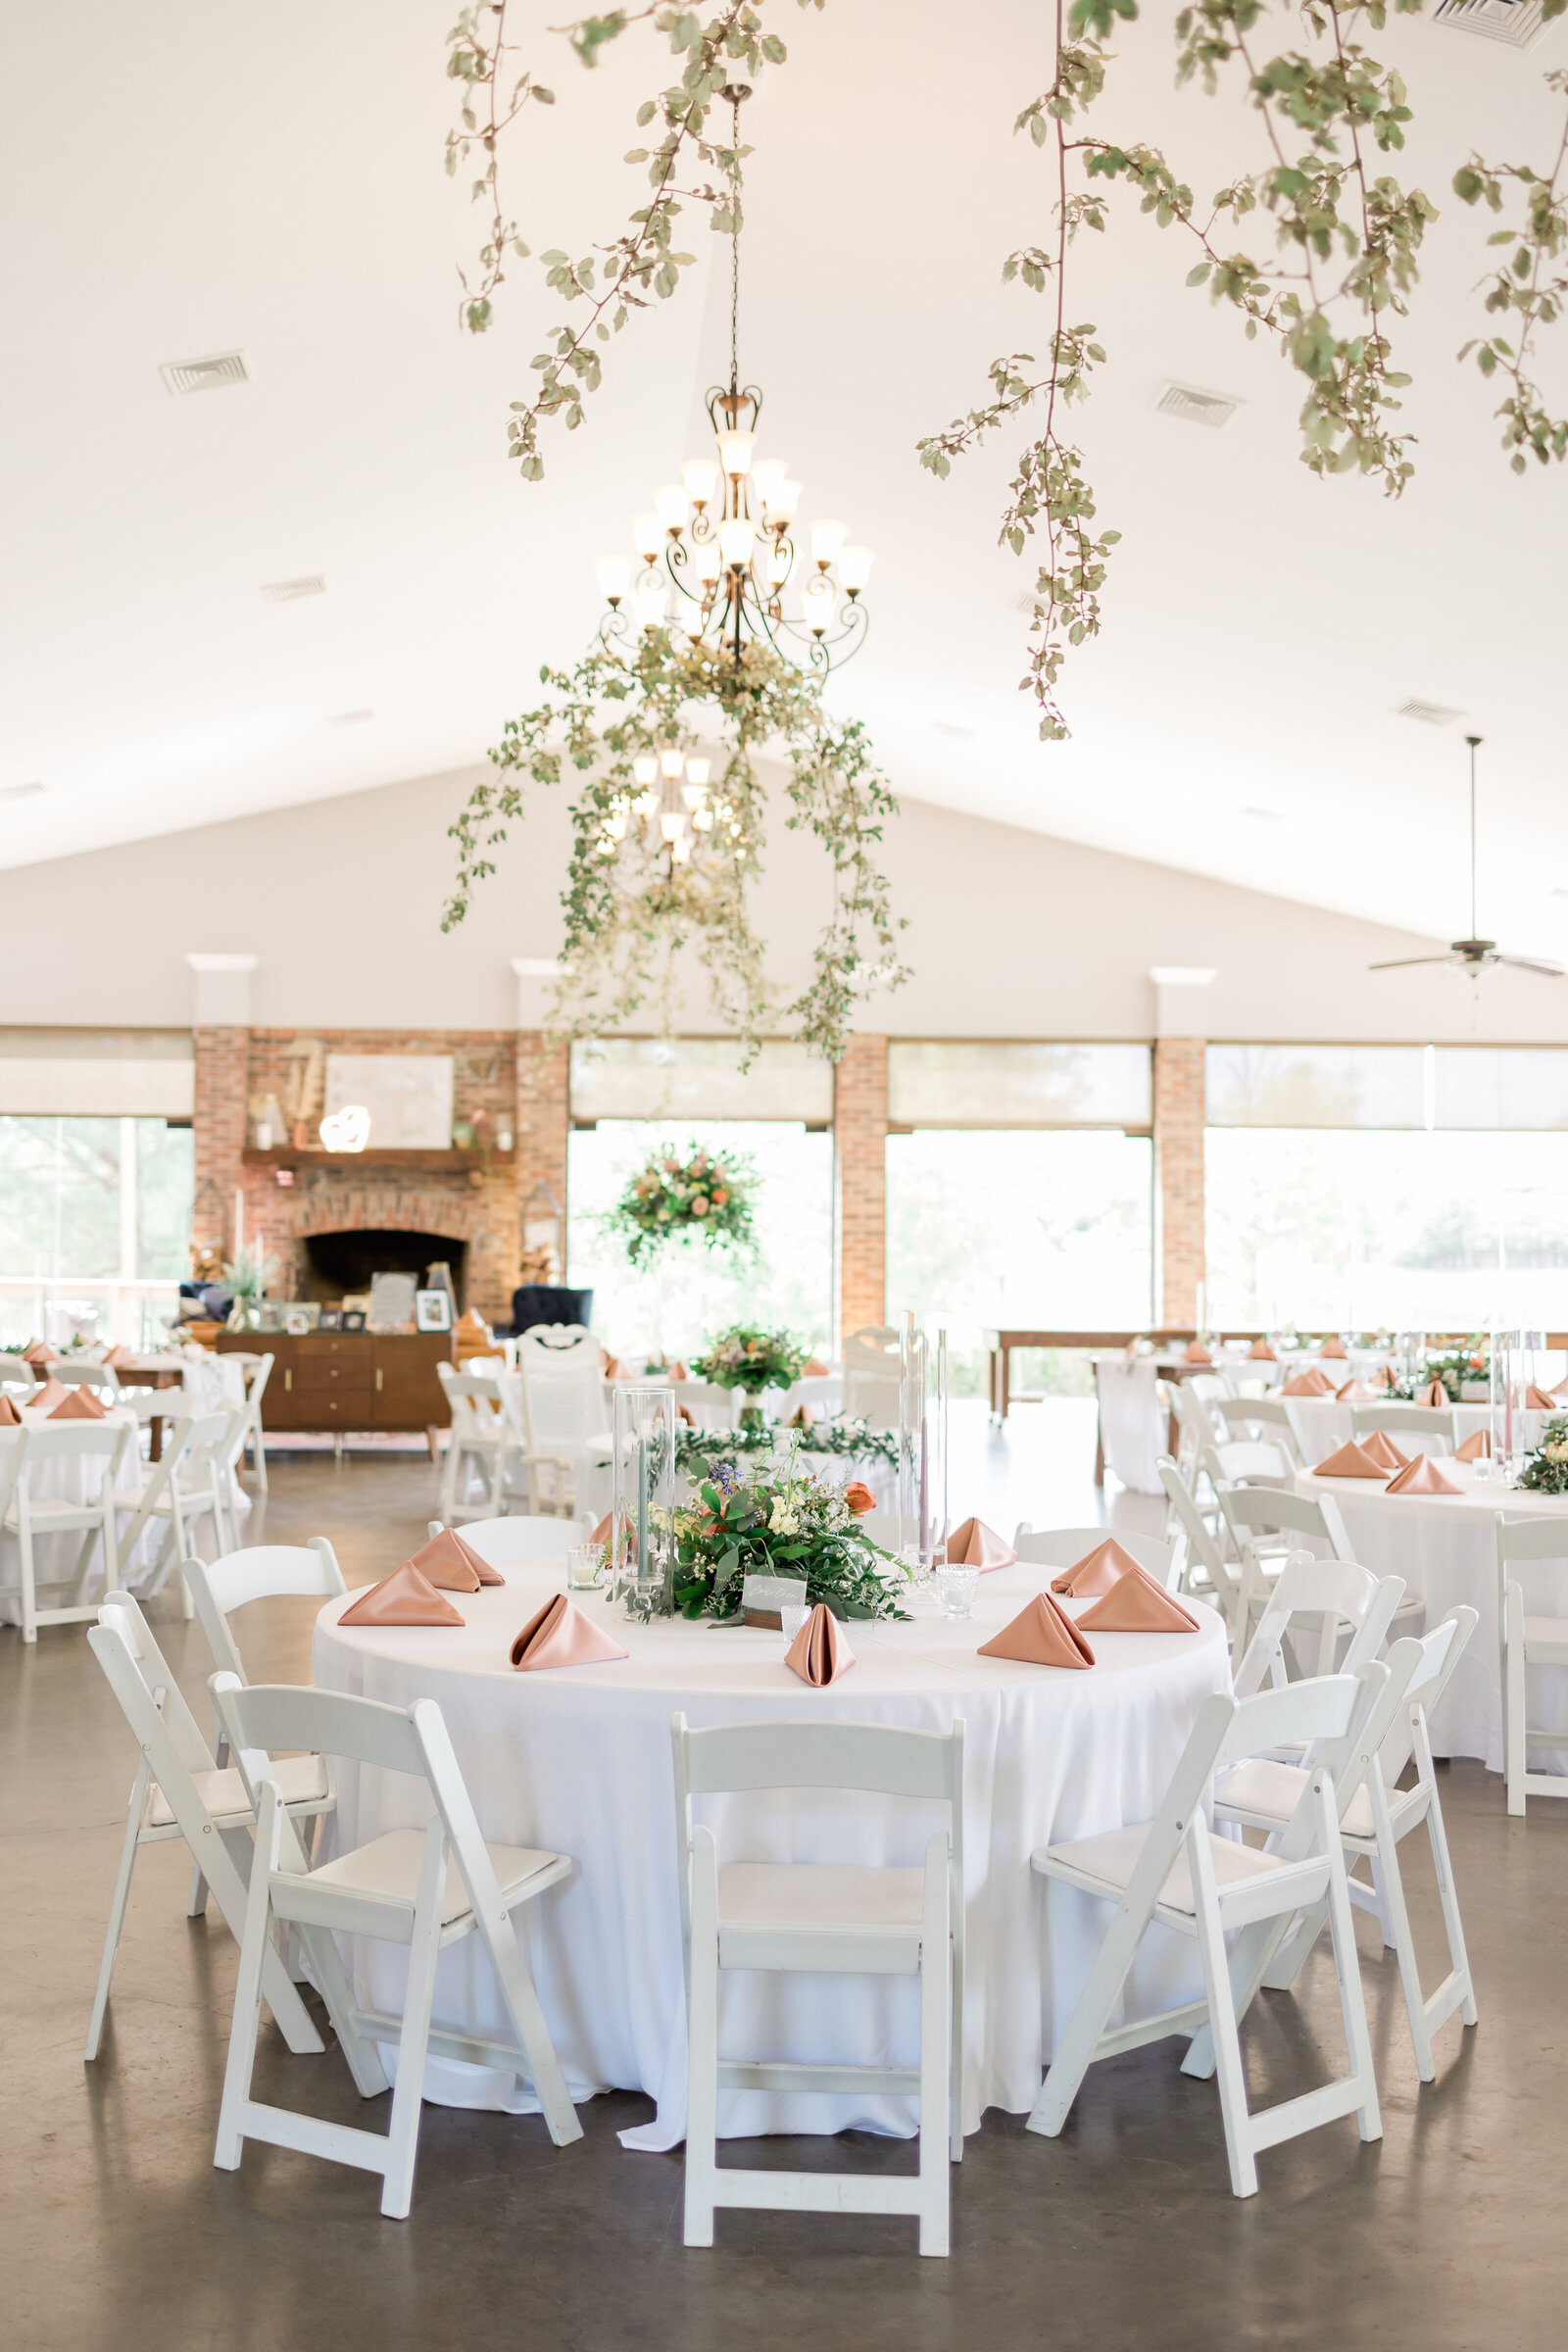 Hunter-Valley-Pavilion-Wedding-Knoxville-Tennessee-Willow-And-Rove-2